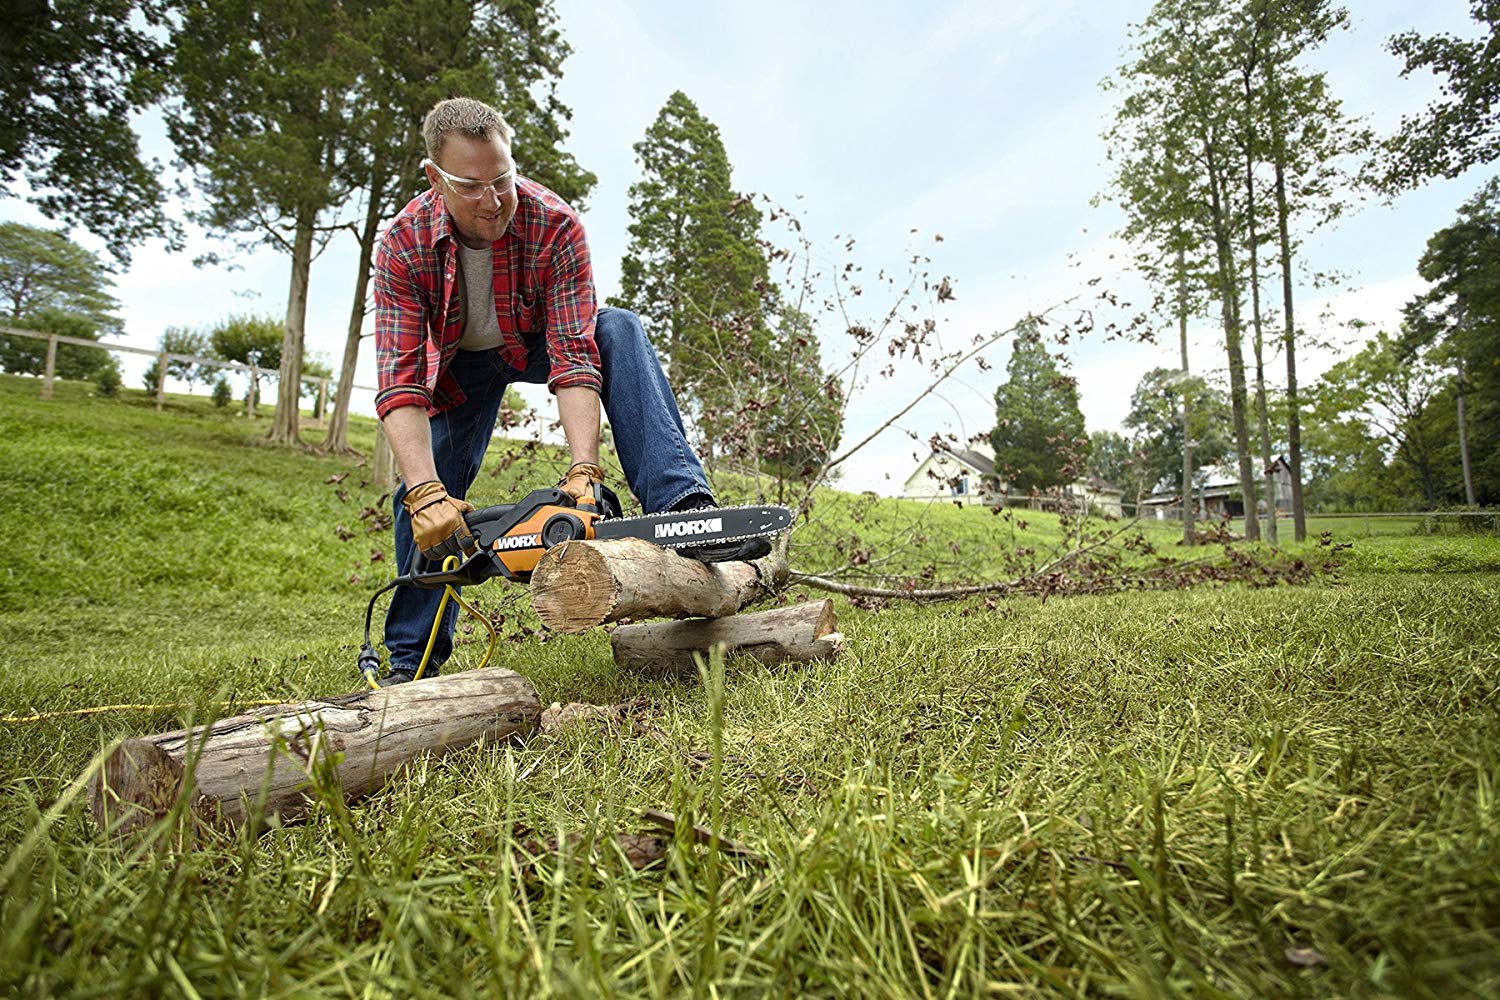 The 5 Best Electric Chainsaws Under $200 of 2022